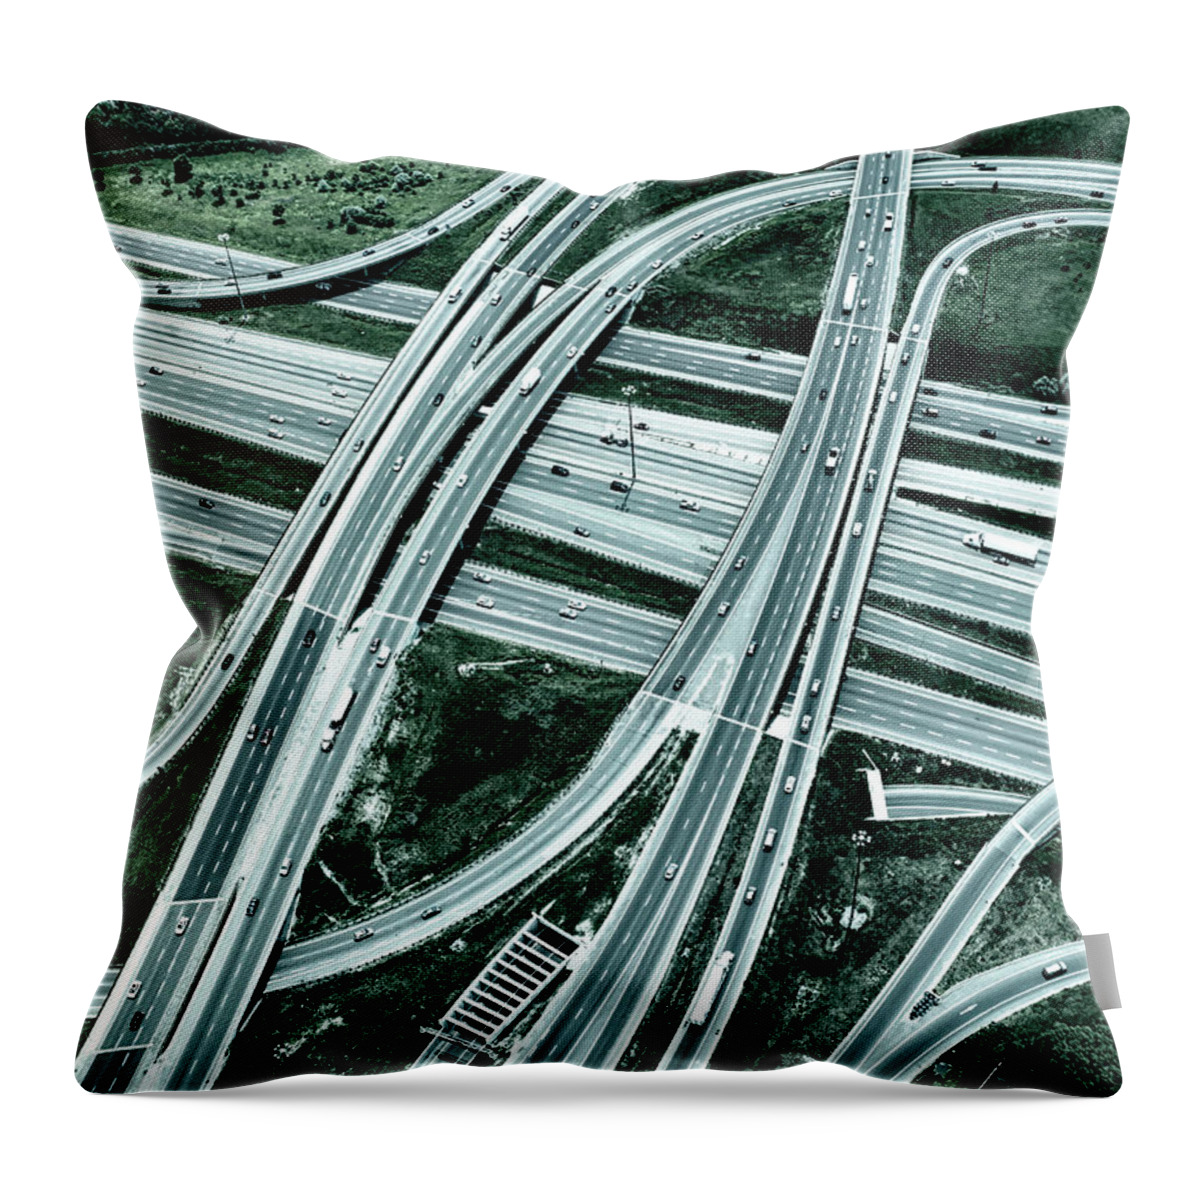 Underpass Throw Pillow featuring the photograph Highway Overpass, Toned Image by Dan prat